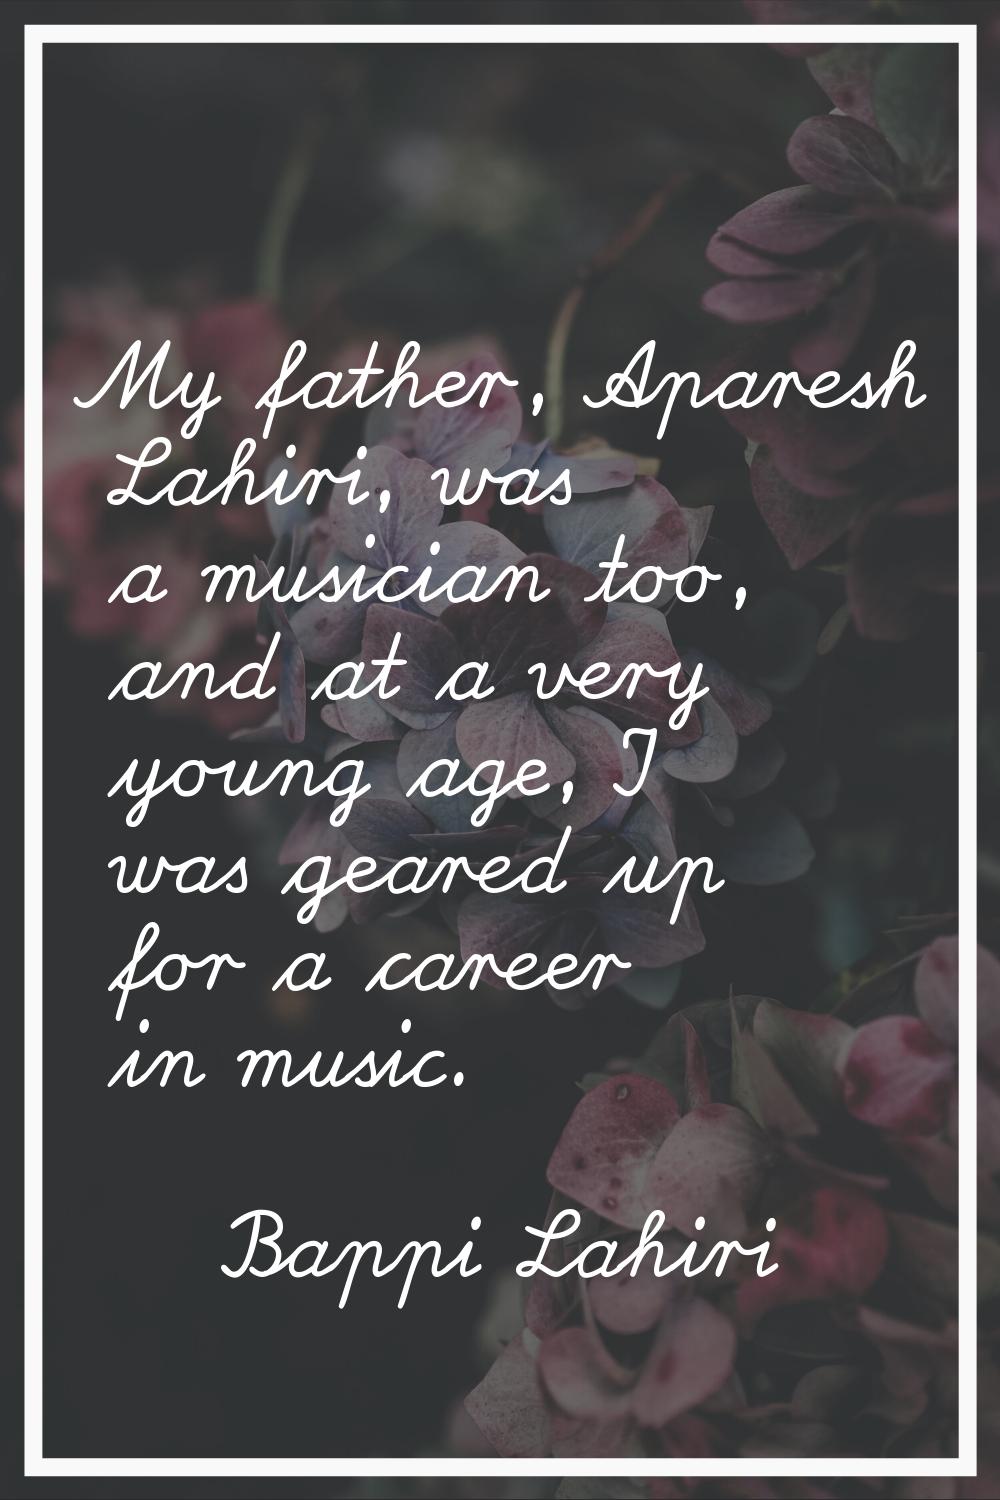 My father, Aparesh Lahiri, was a musician too, and at a very young age, I was geared up for a caree